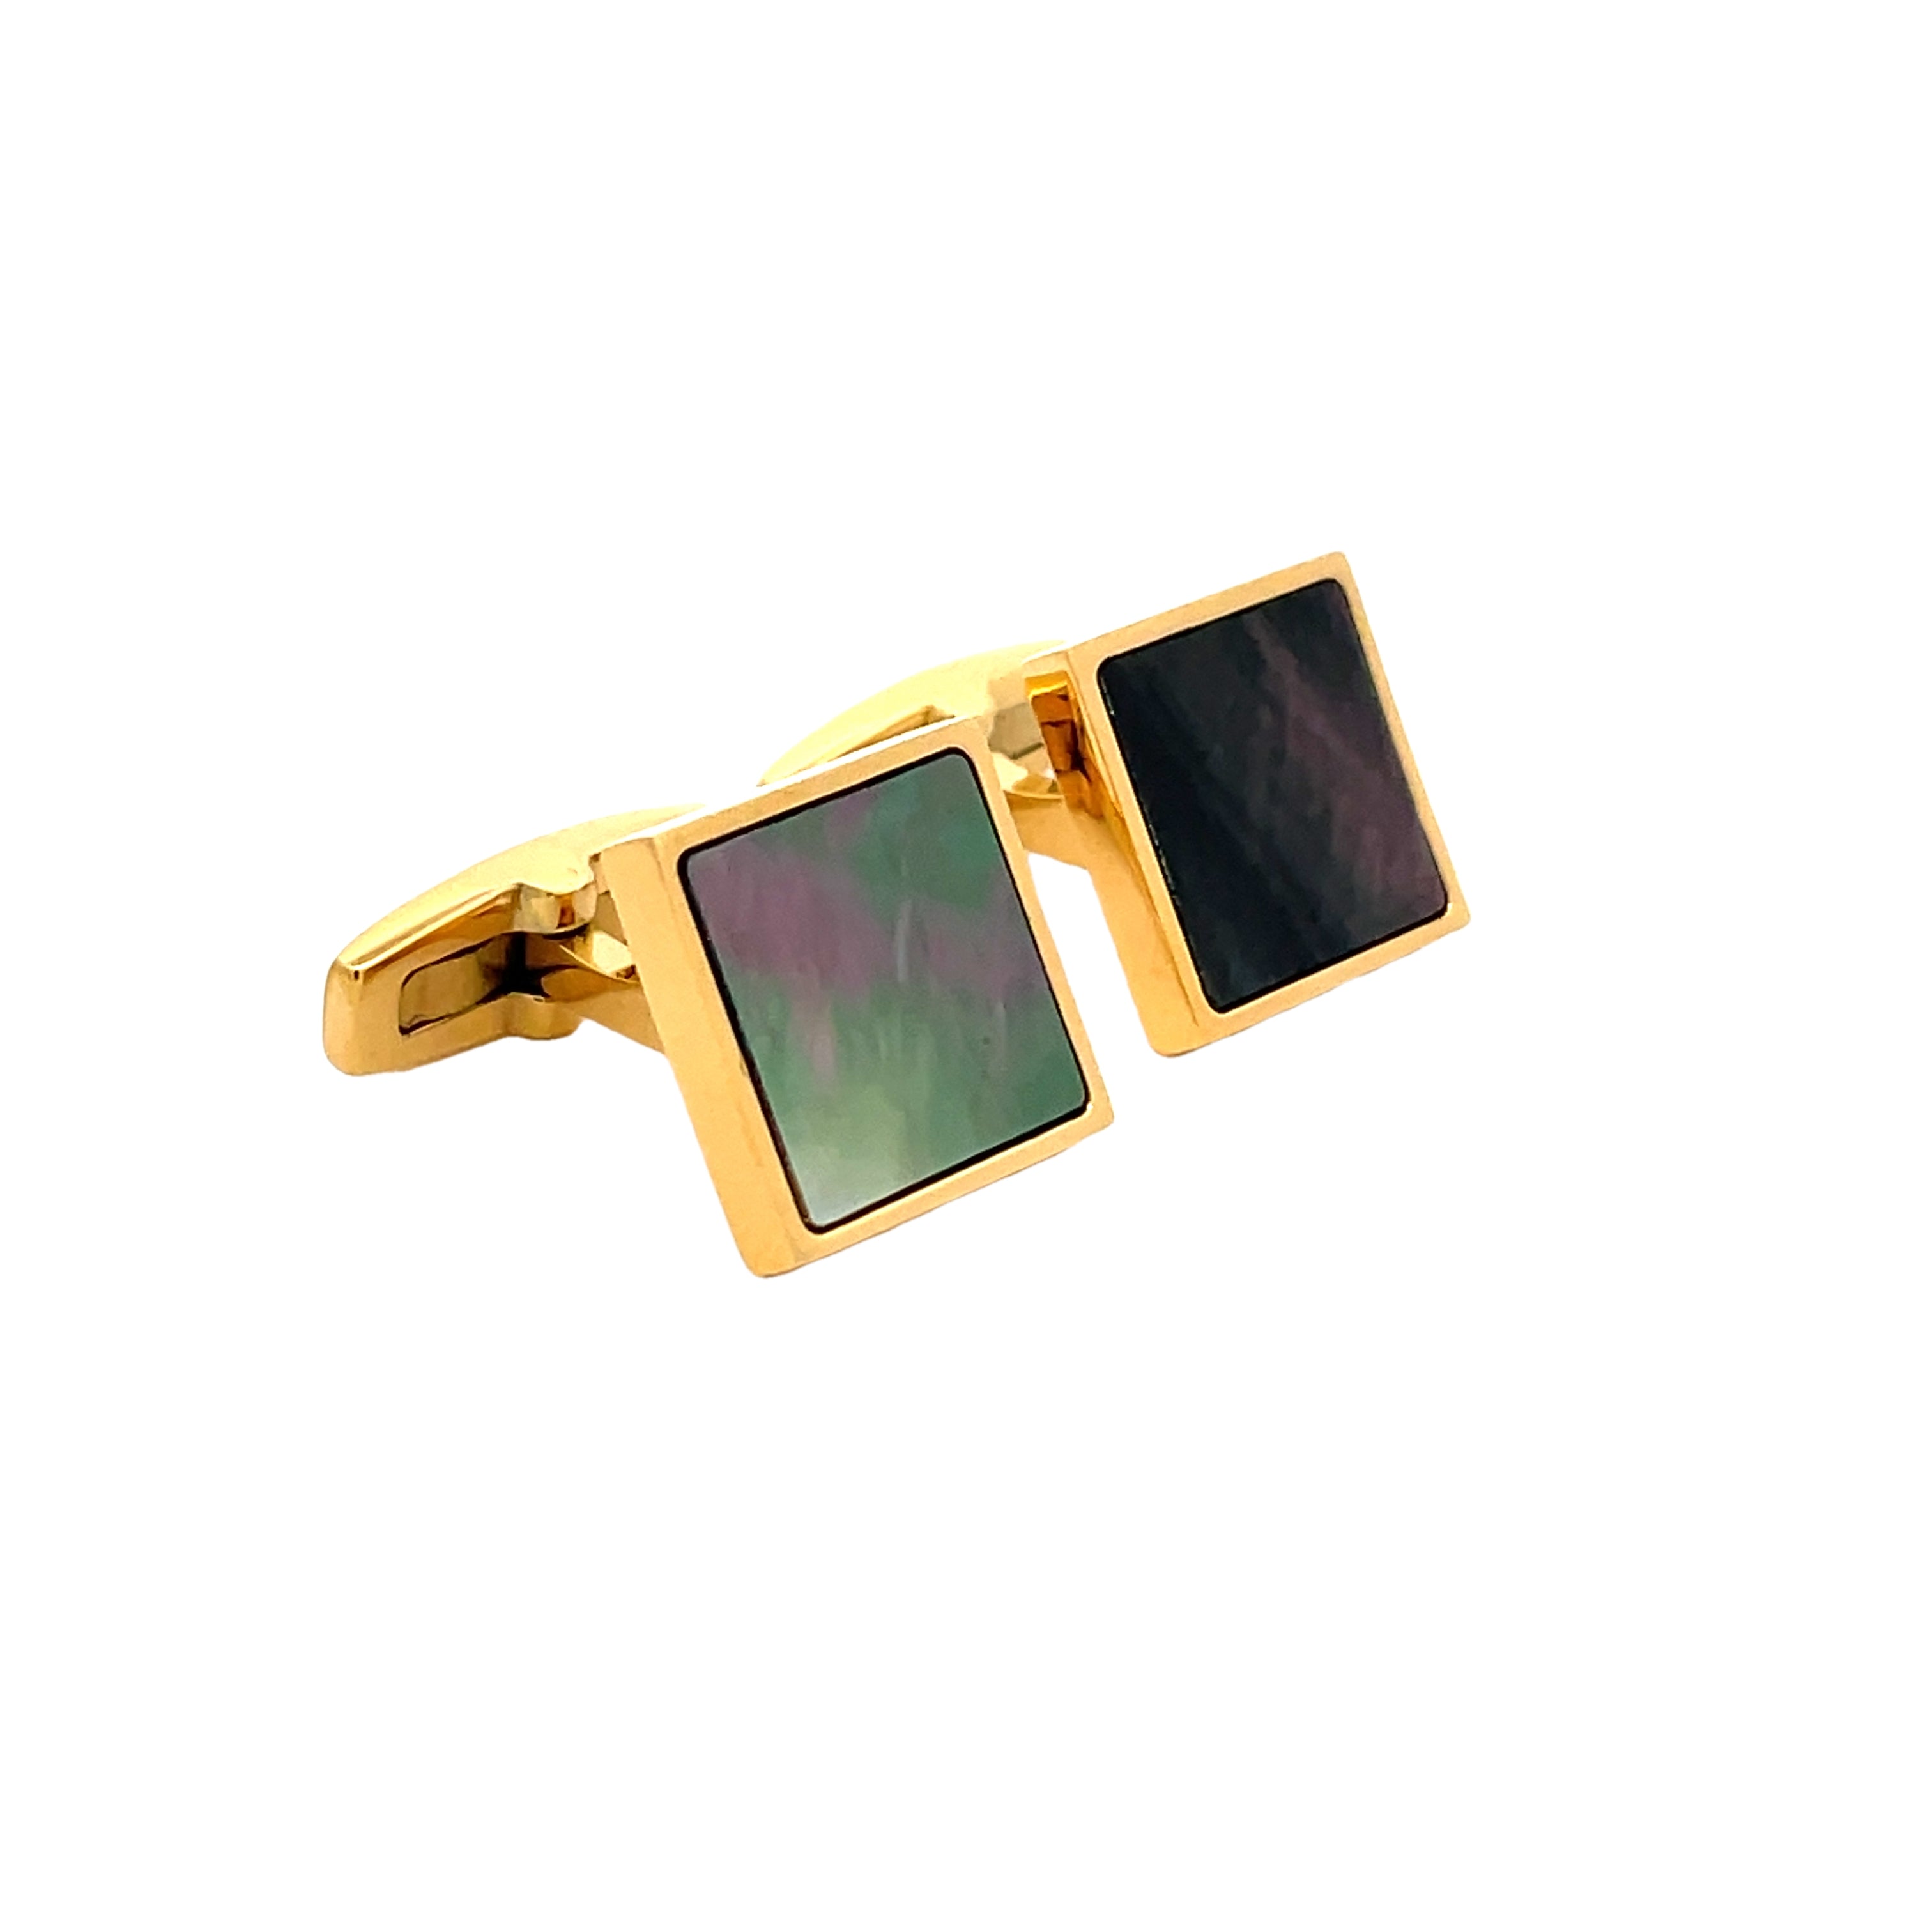 Gold Plated Stainless Steel Black Mother Of Pearl Square Cufflinks